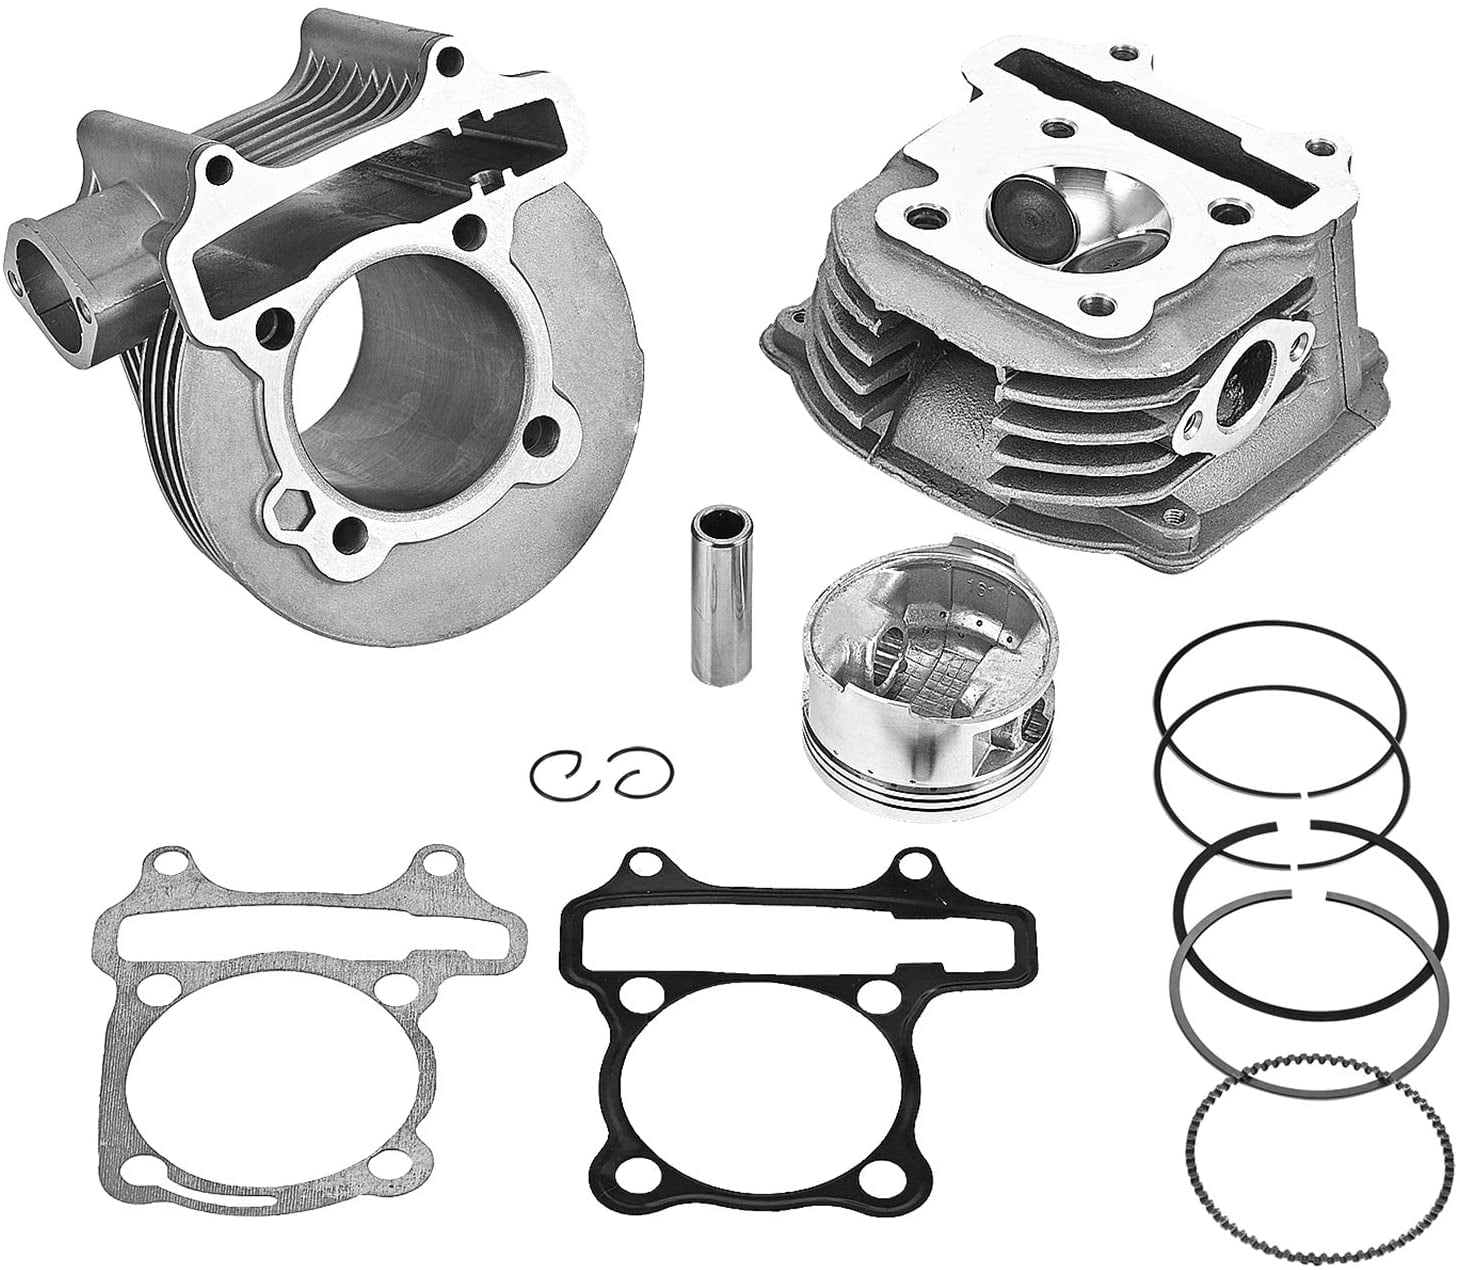 61mm Big Bore kits with Piston and Ring Assy for 152QMI 157QMJ Engine Chinese Scooter Moped ATV Go Kart Quad GY6 125cc/150cc Engine Upgrade to 180cc with Cylinder Head Valves and Rebuilt Kit 